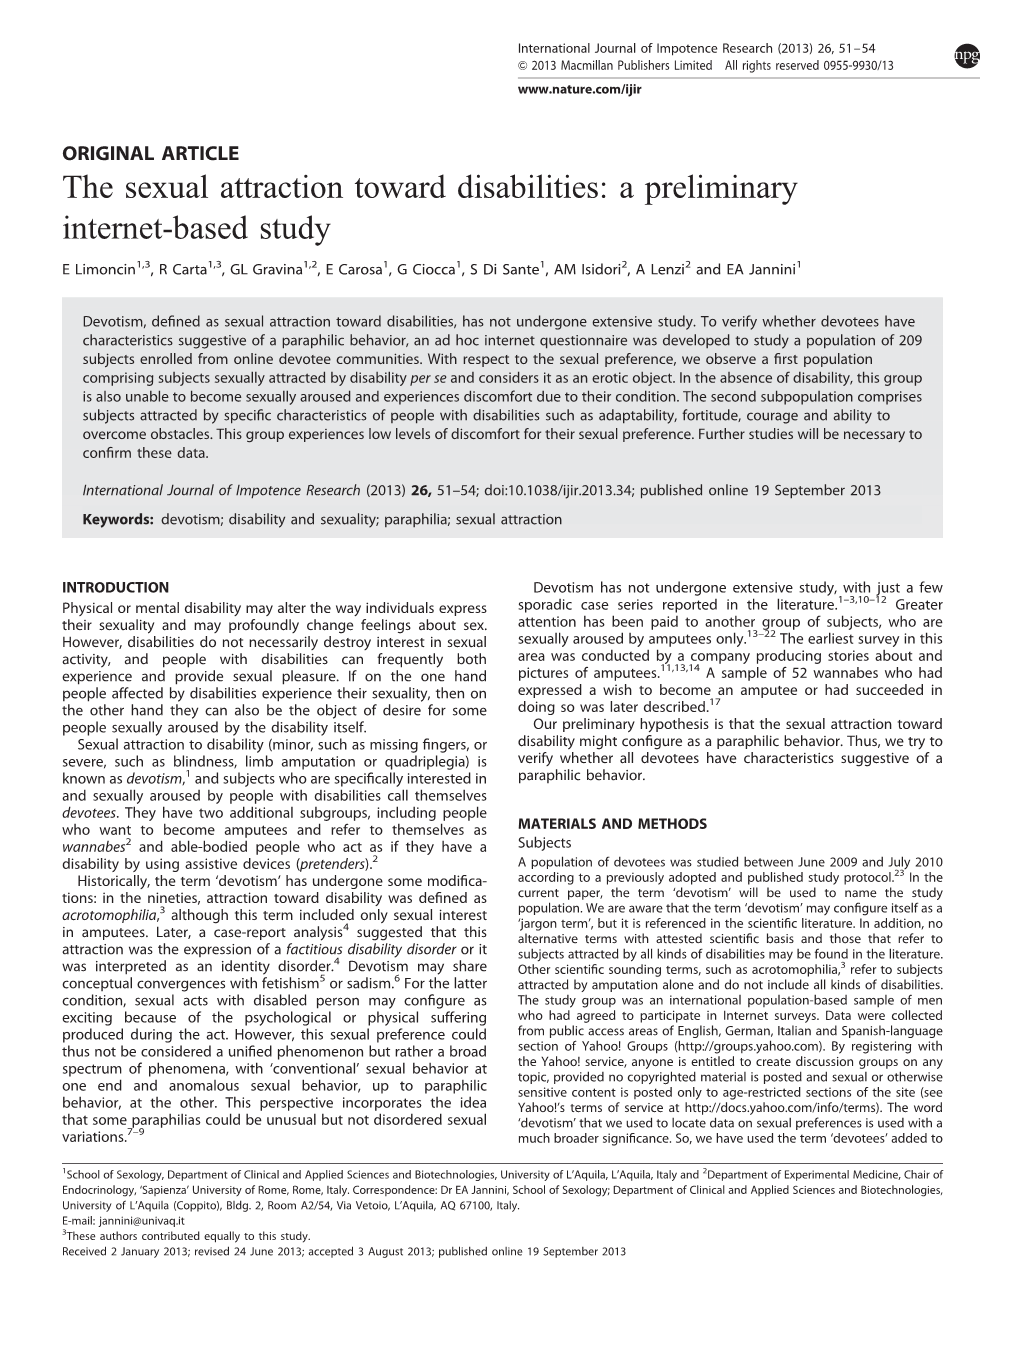 The Sexual Attraction Toward Disabilities: a Preliminary Internet-Based Study